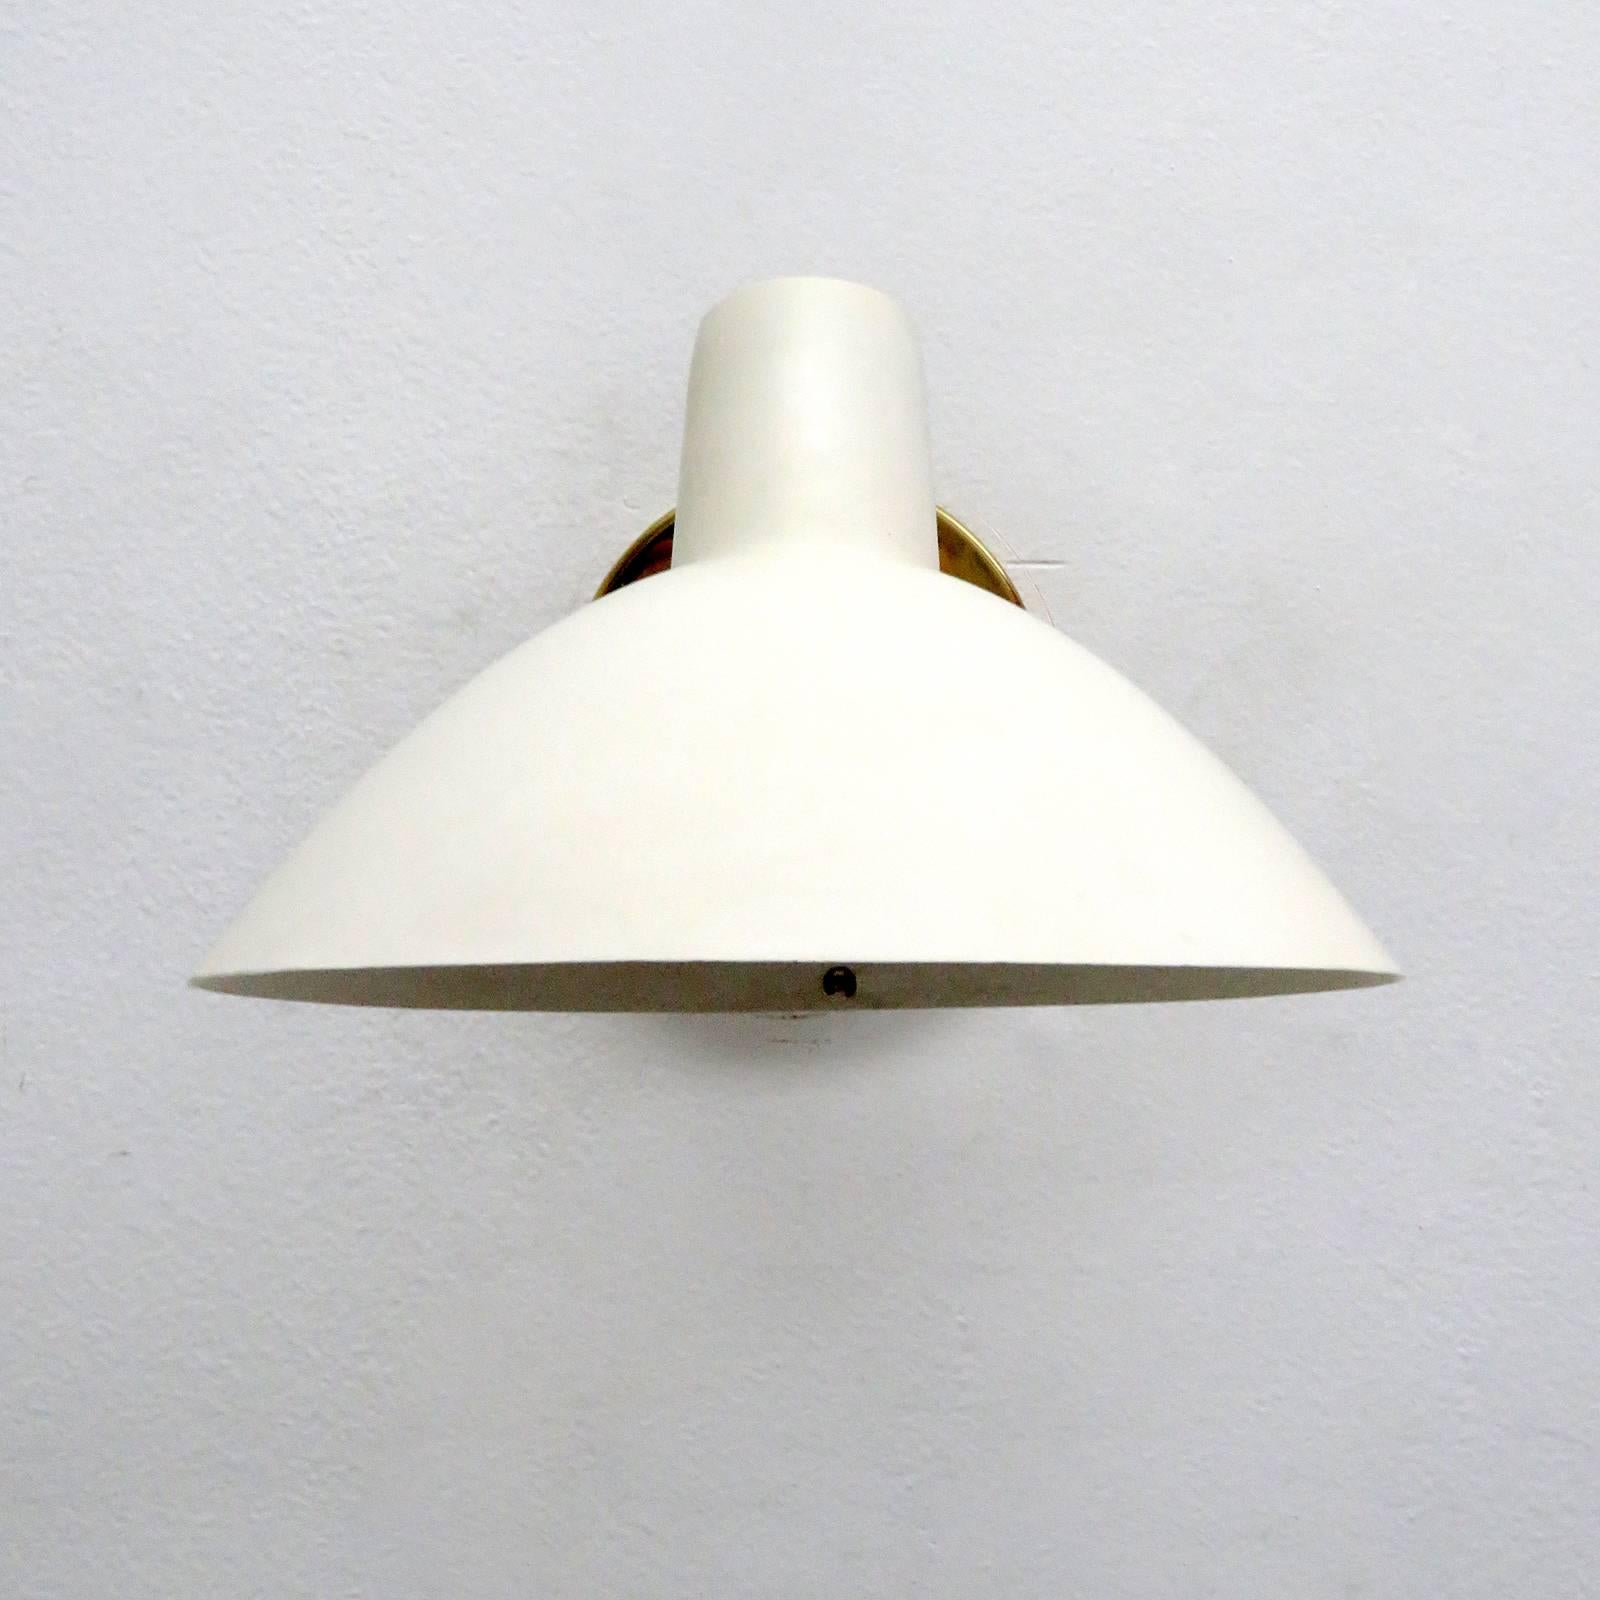 Wonderful 'Visor' wall light by Vittoriano Vigano for Arteluce designed in Italy, 1950s, egg shell colored enameled aluminium, brass, can be mounted in an upward or downward position, shade articulate left/right, on/off switch on the brass back